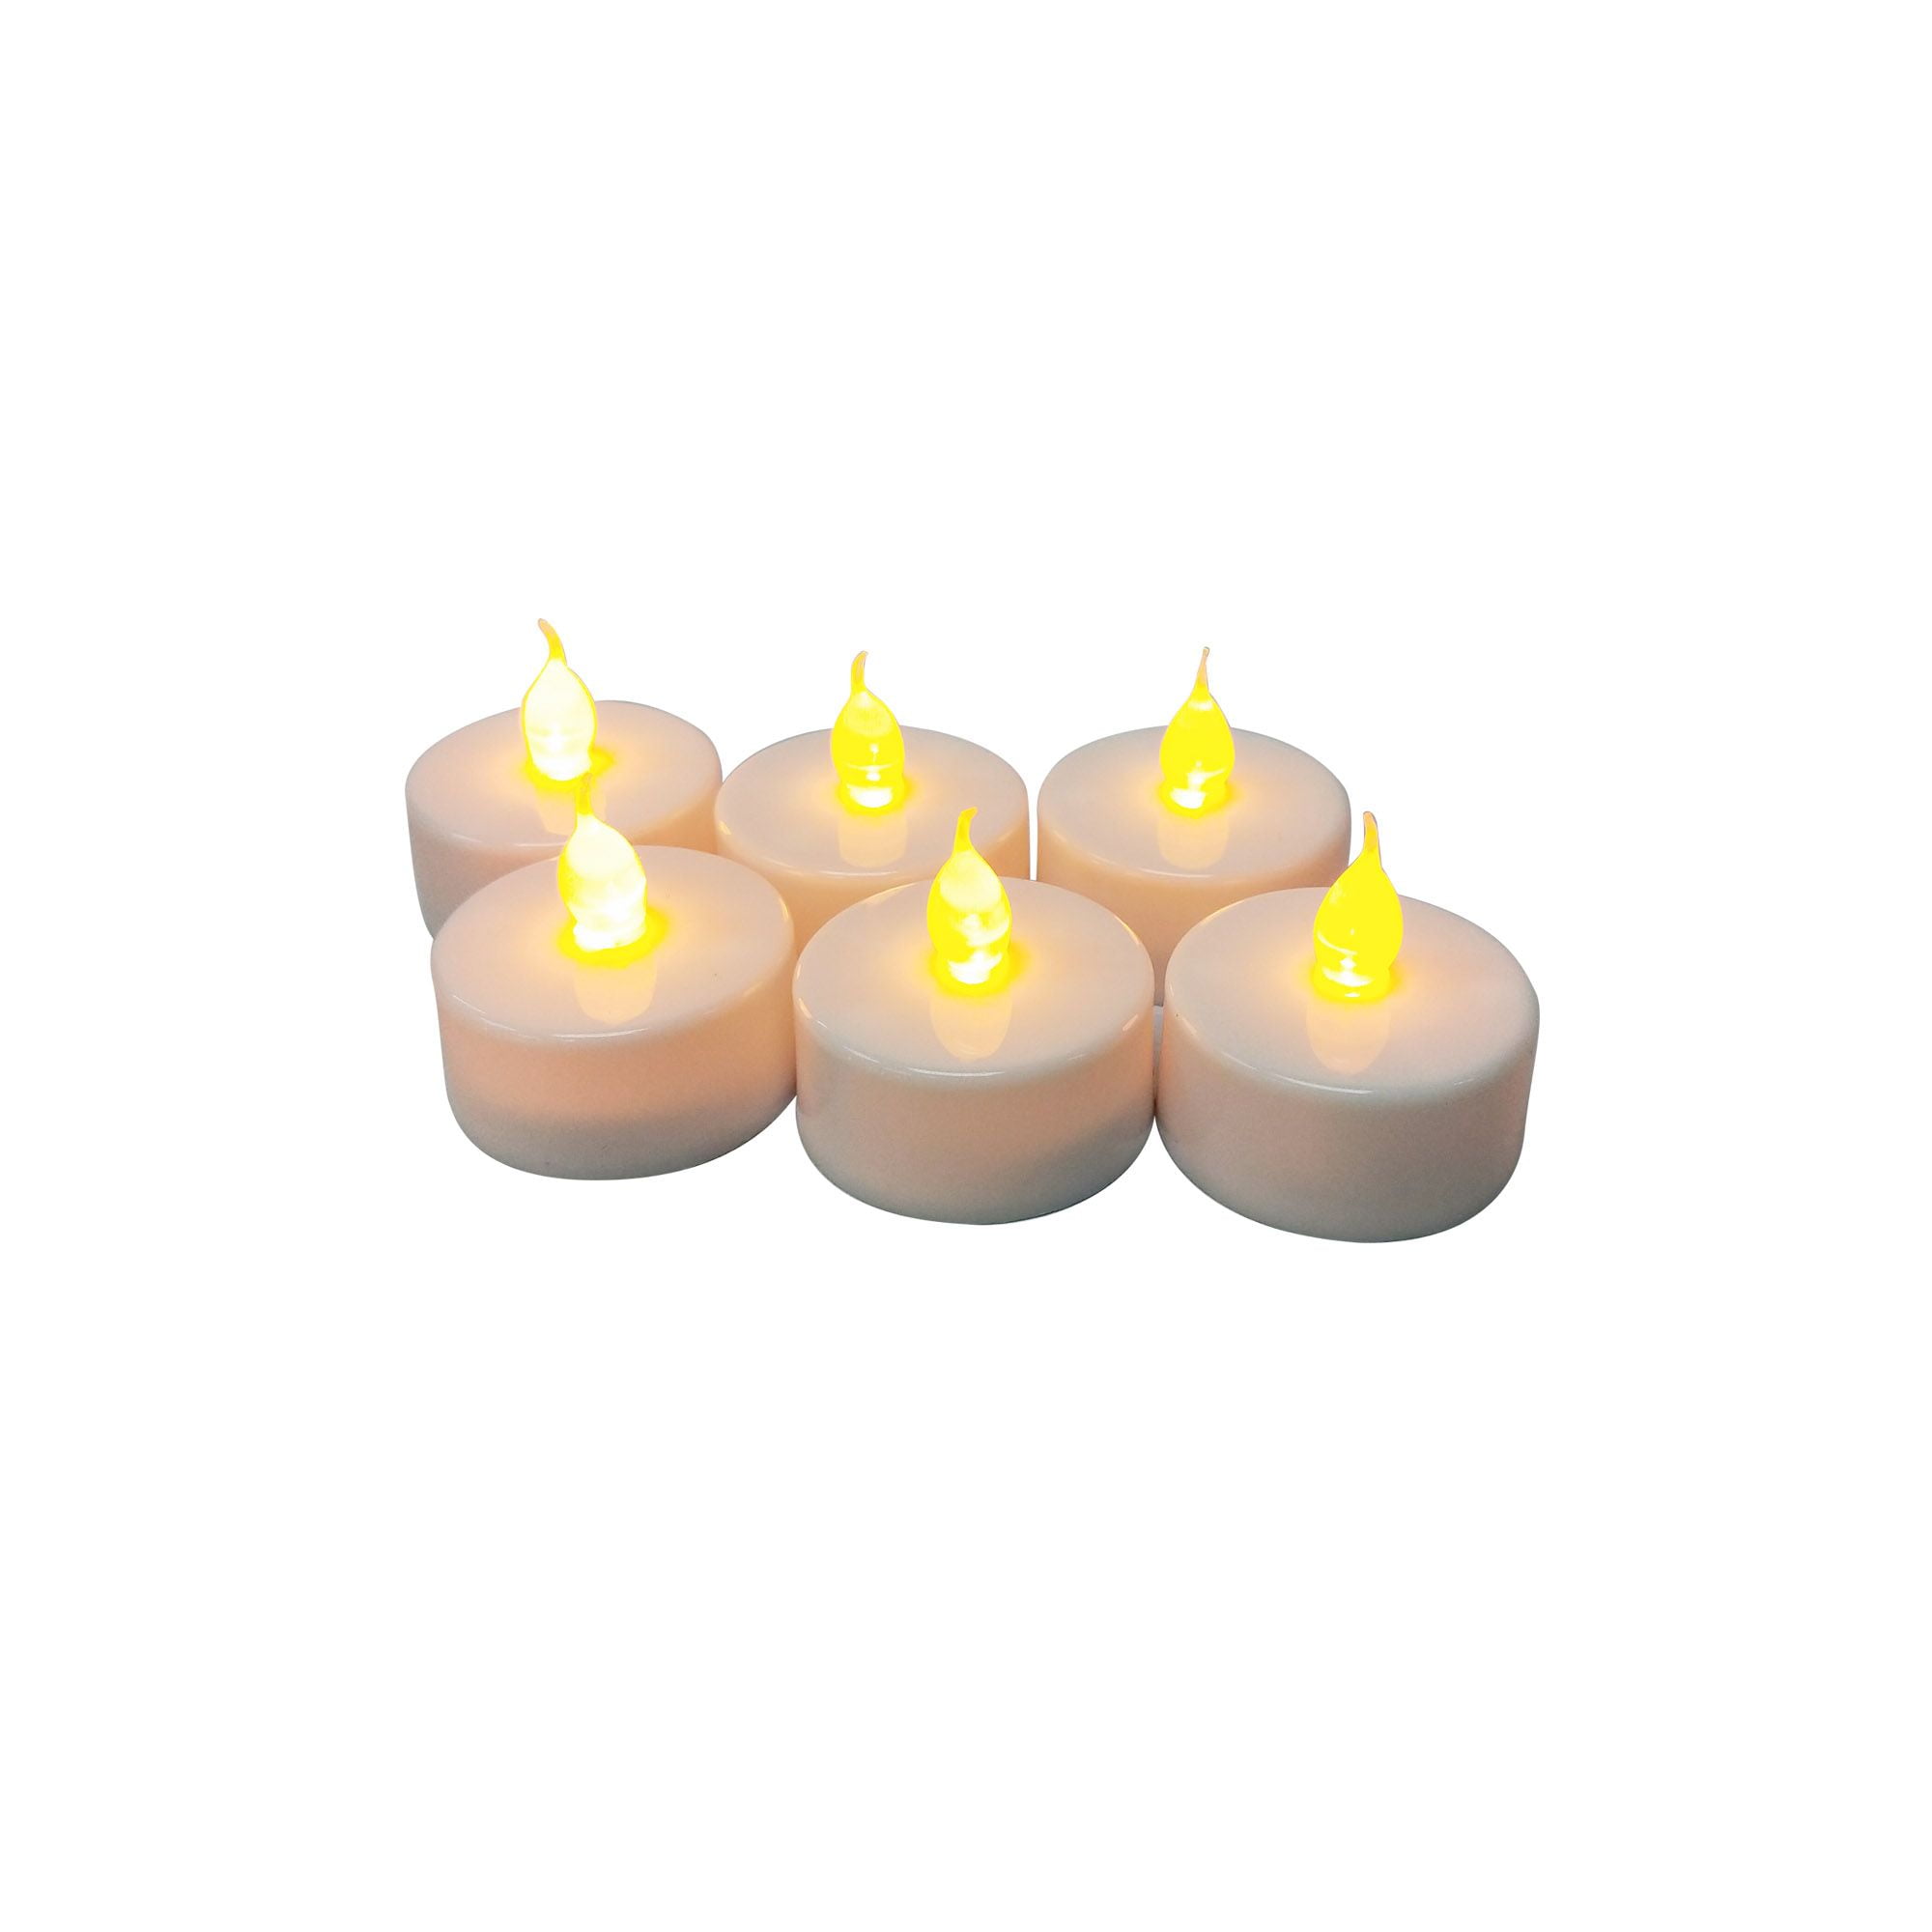 5 SCENTED TEA LIGHT HOLDERS,PRACTICAL ATTRACTIVE WARM GLOW,GREAT VALUE FREE P&P 